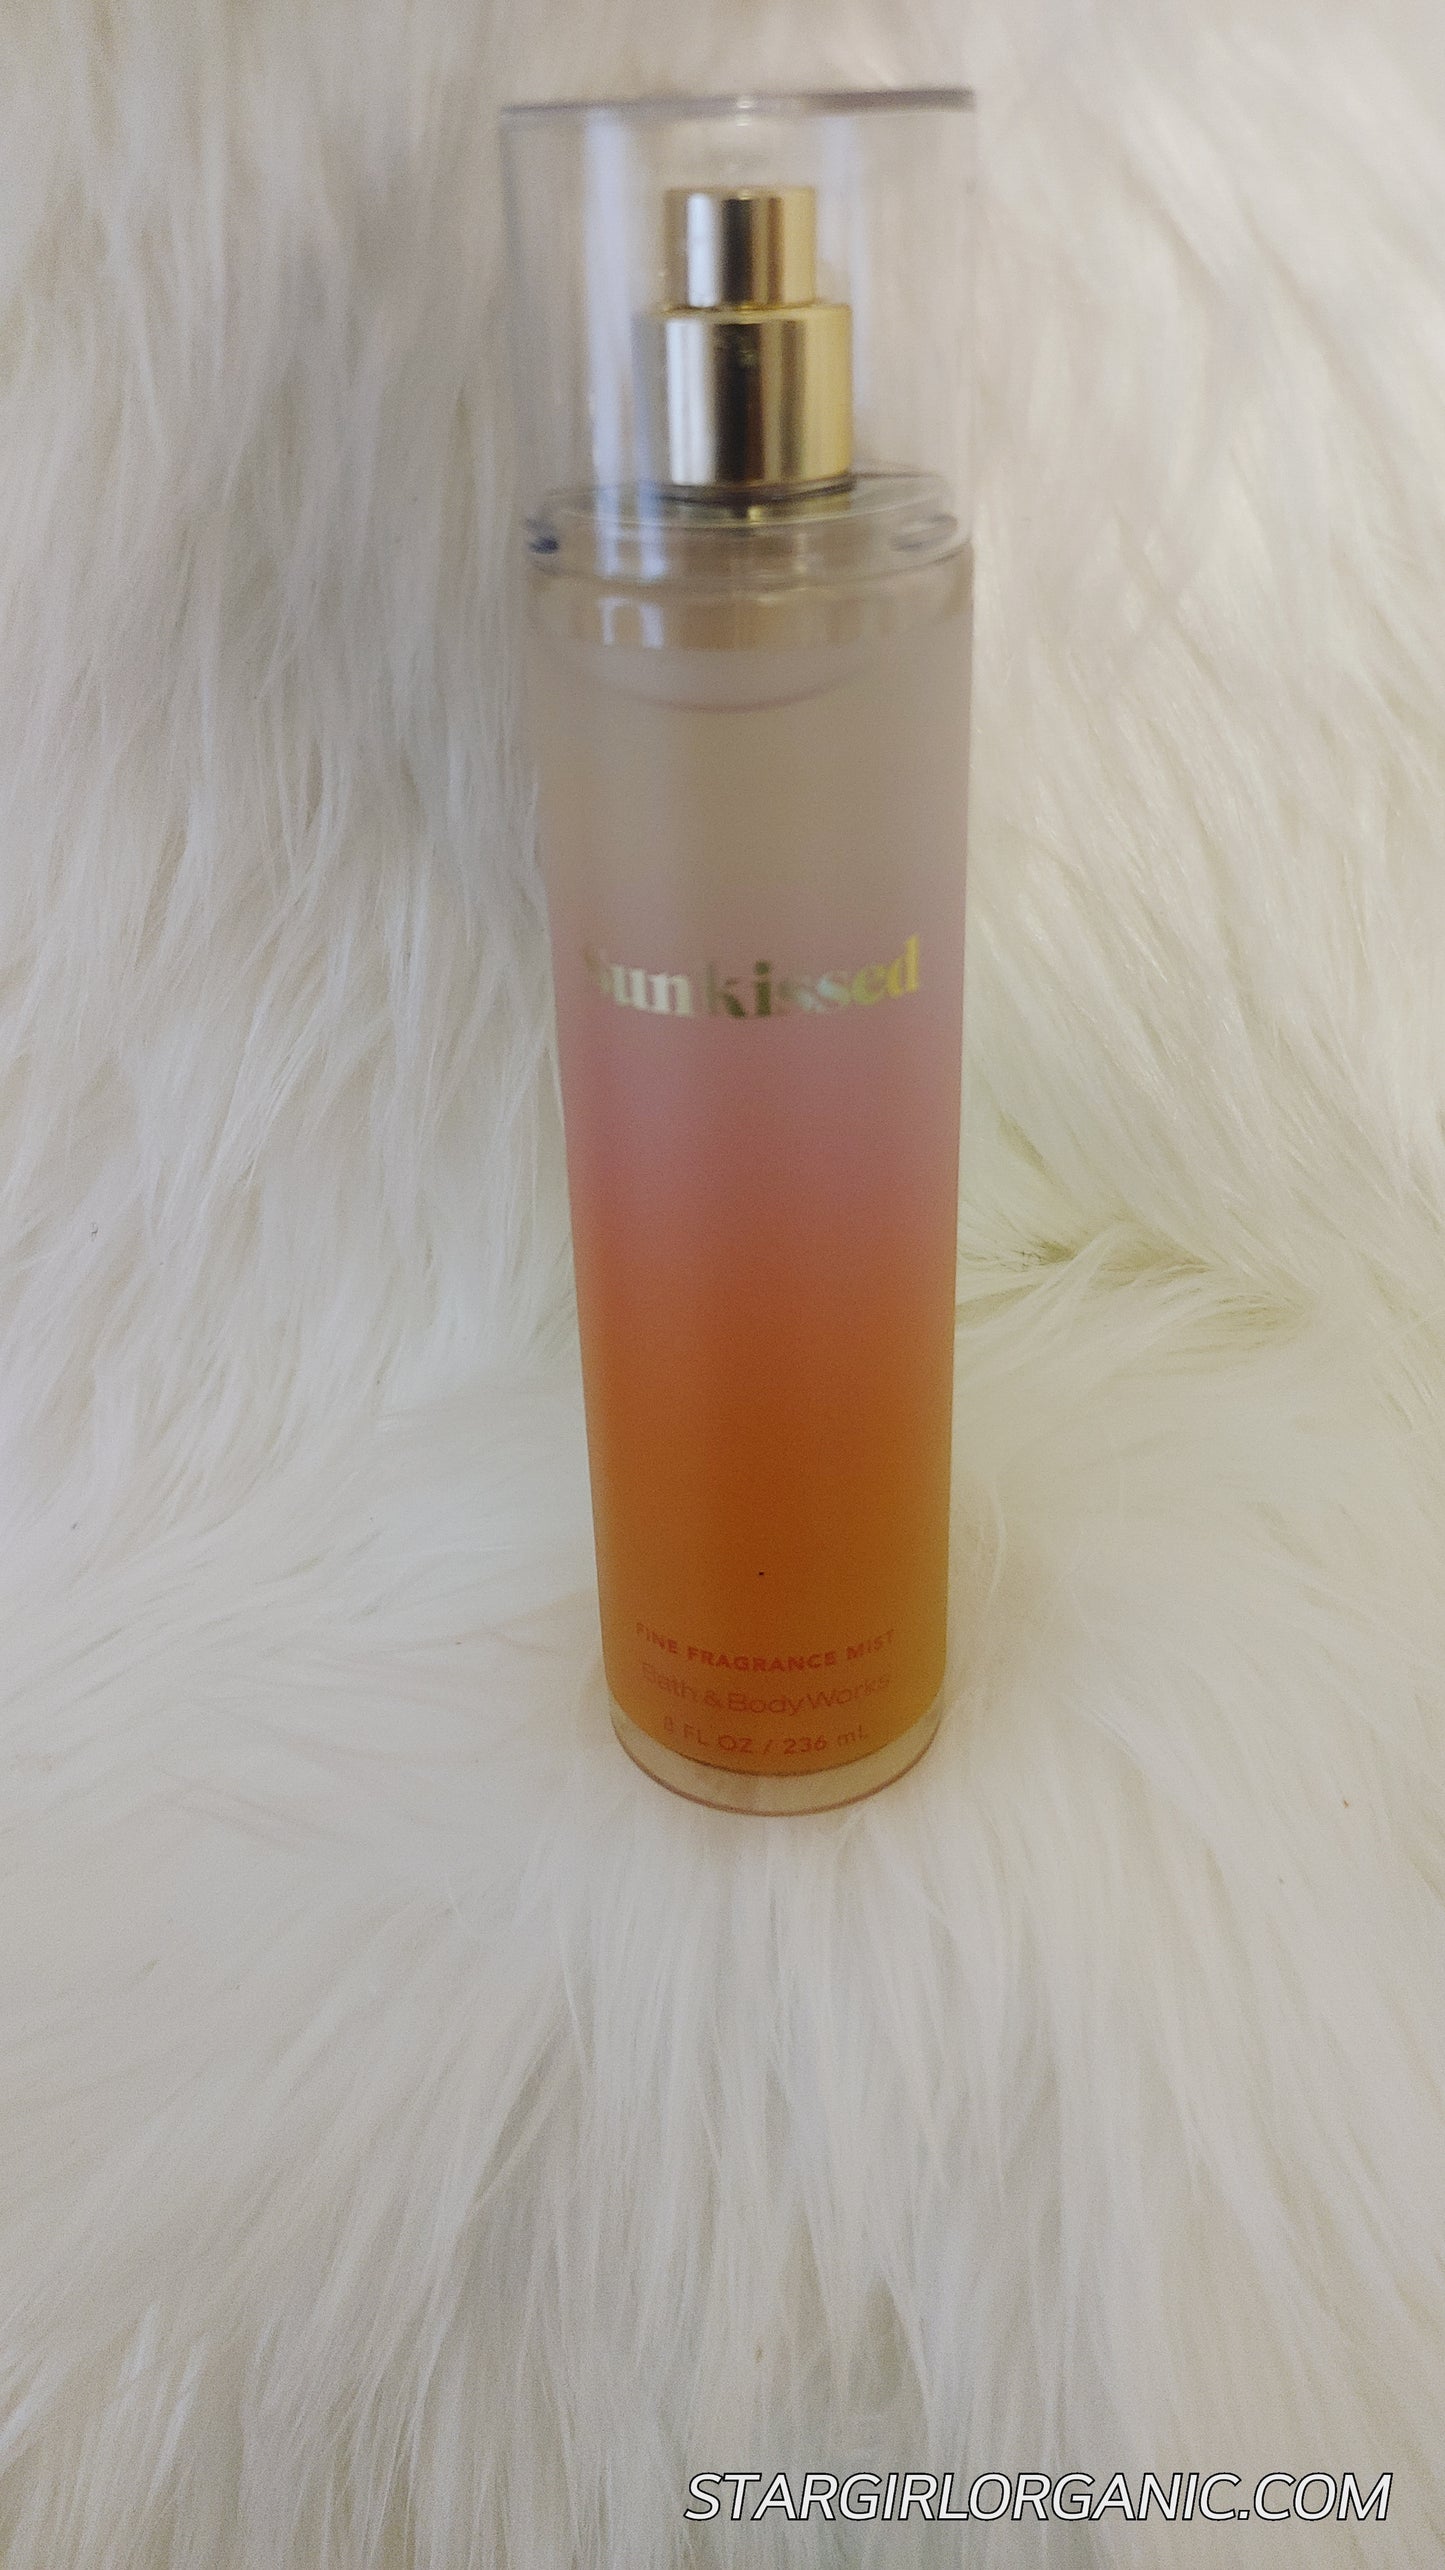 Bath and Body Works Sunkissed. Fragrance Mist